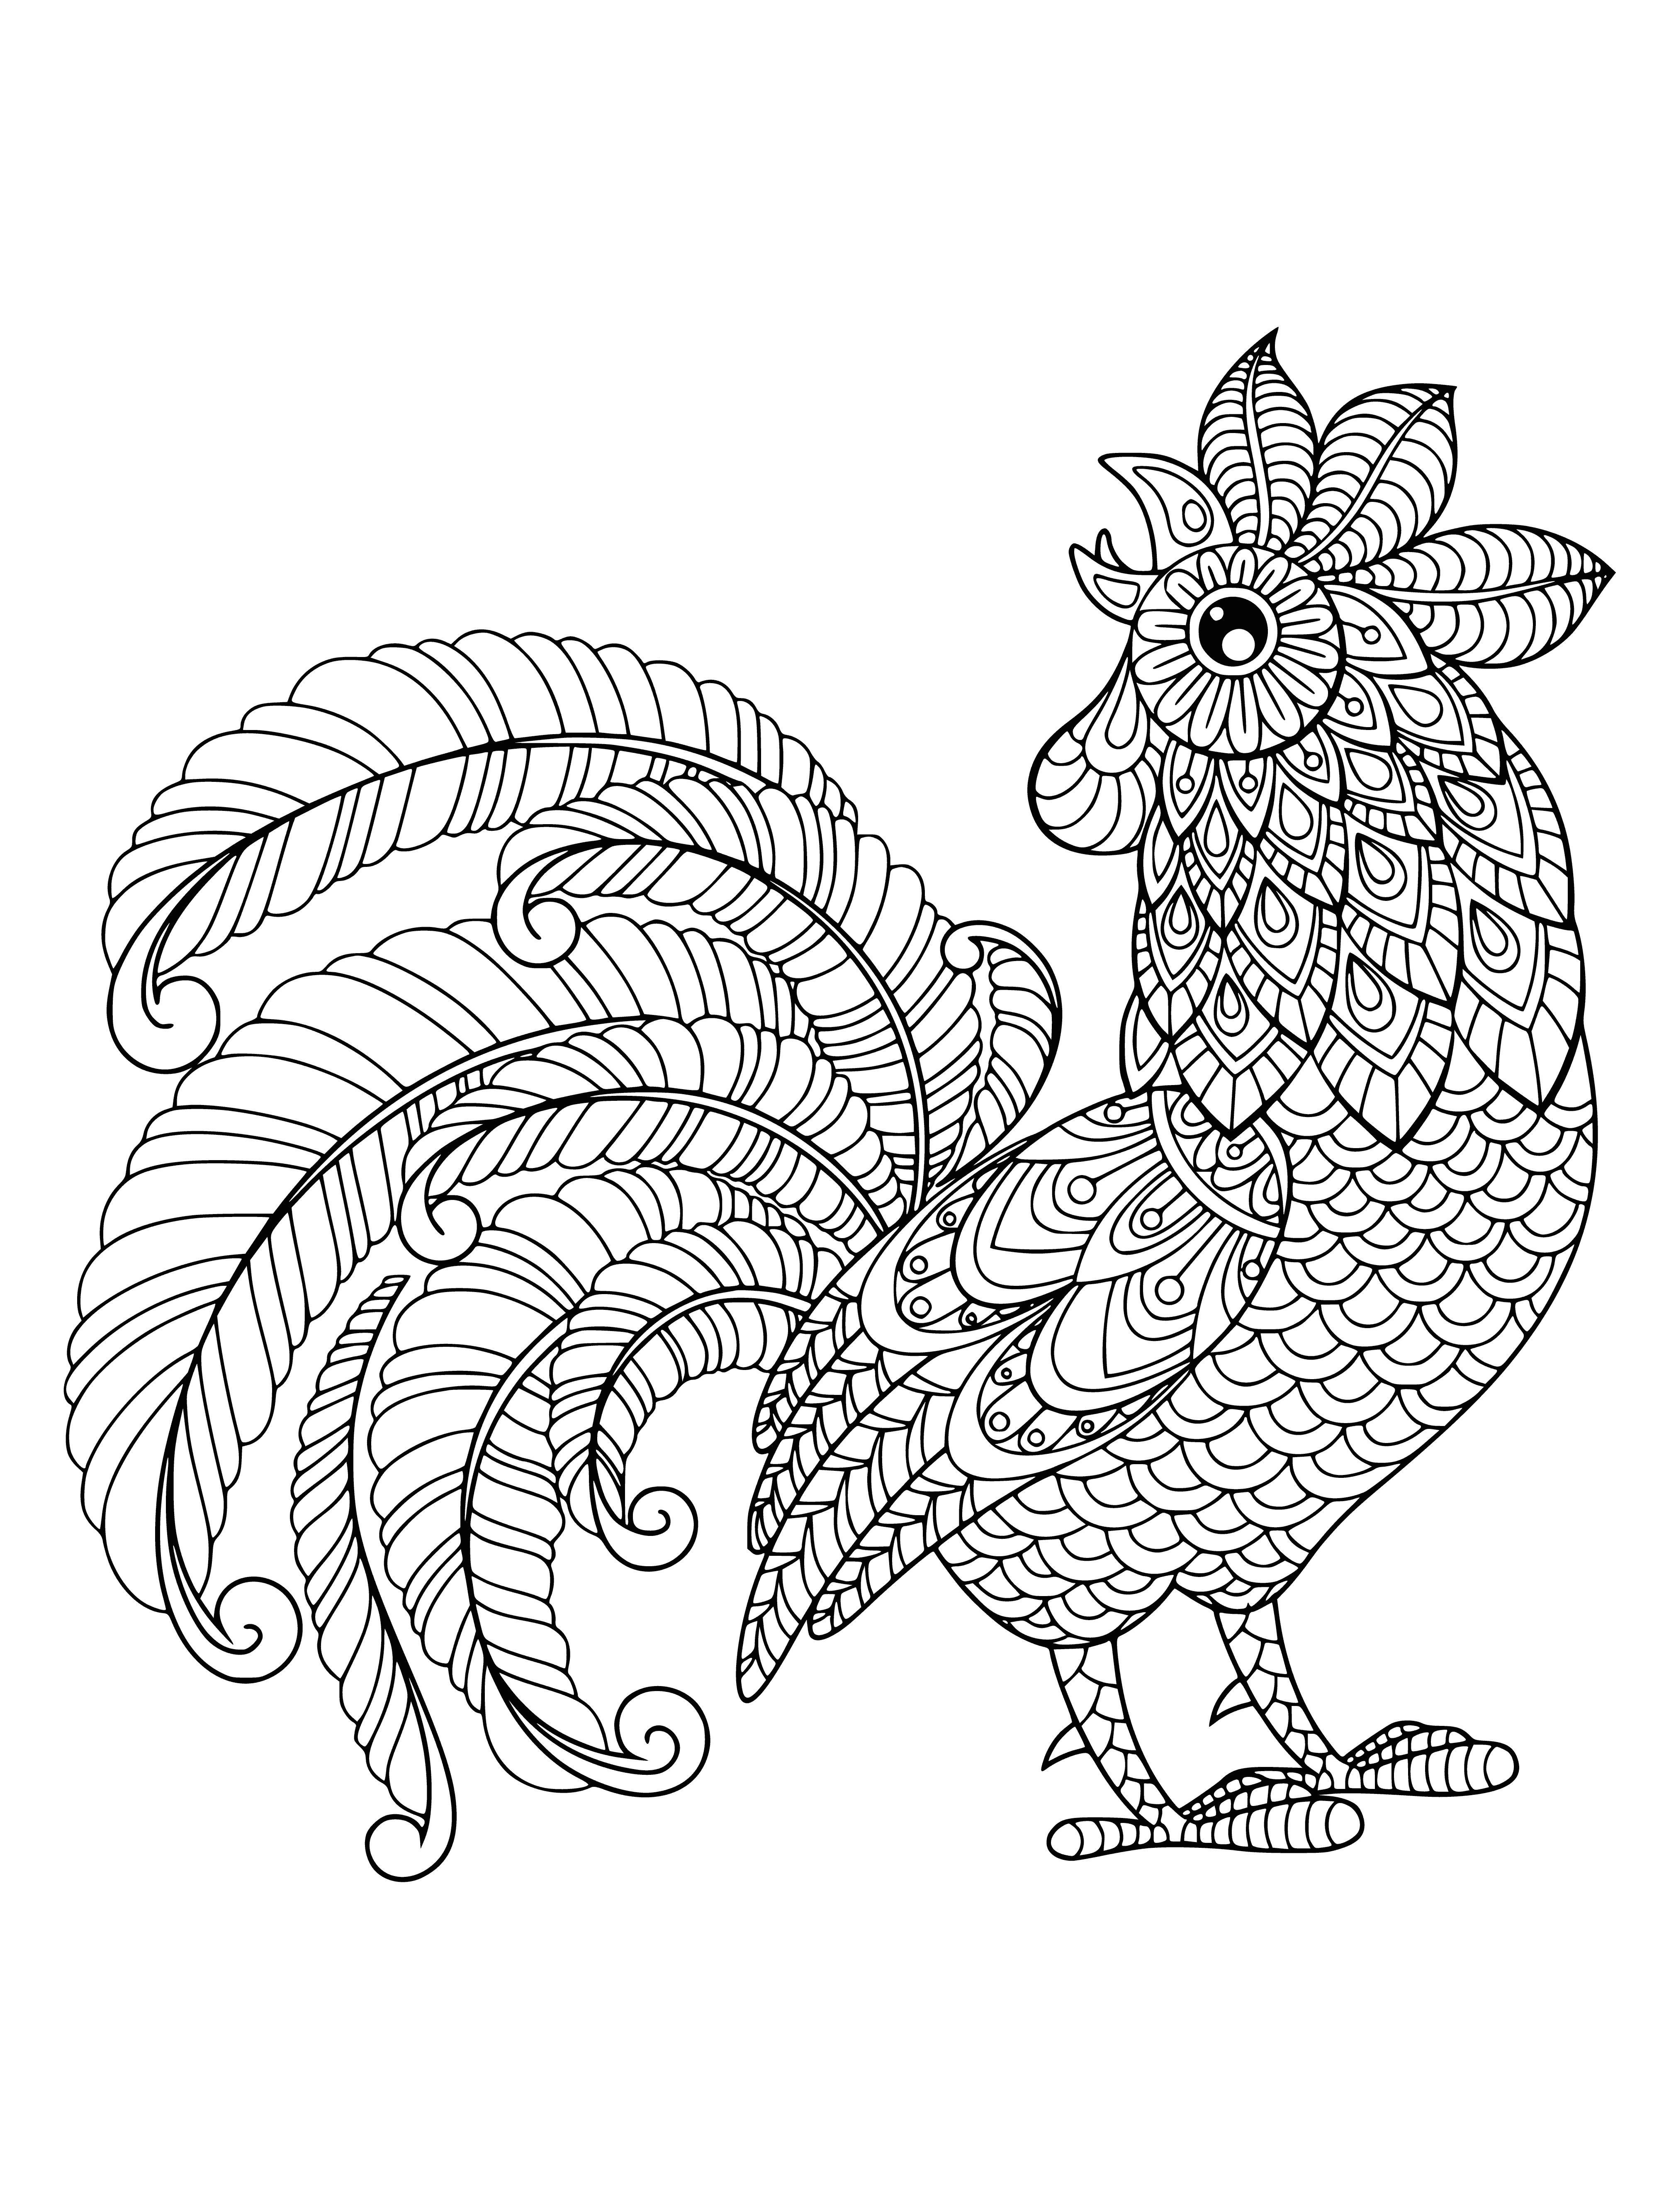 coloring page: An ornately crowned rooster surrounded by colorful flowers on a blue background. #coloring #roostercrowing